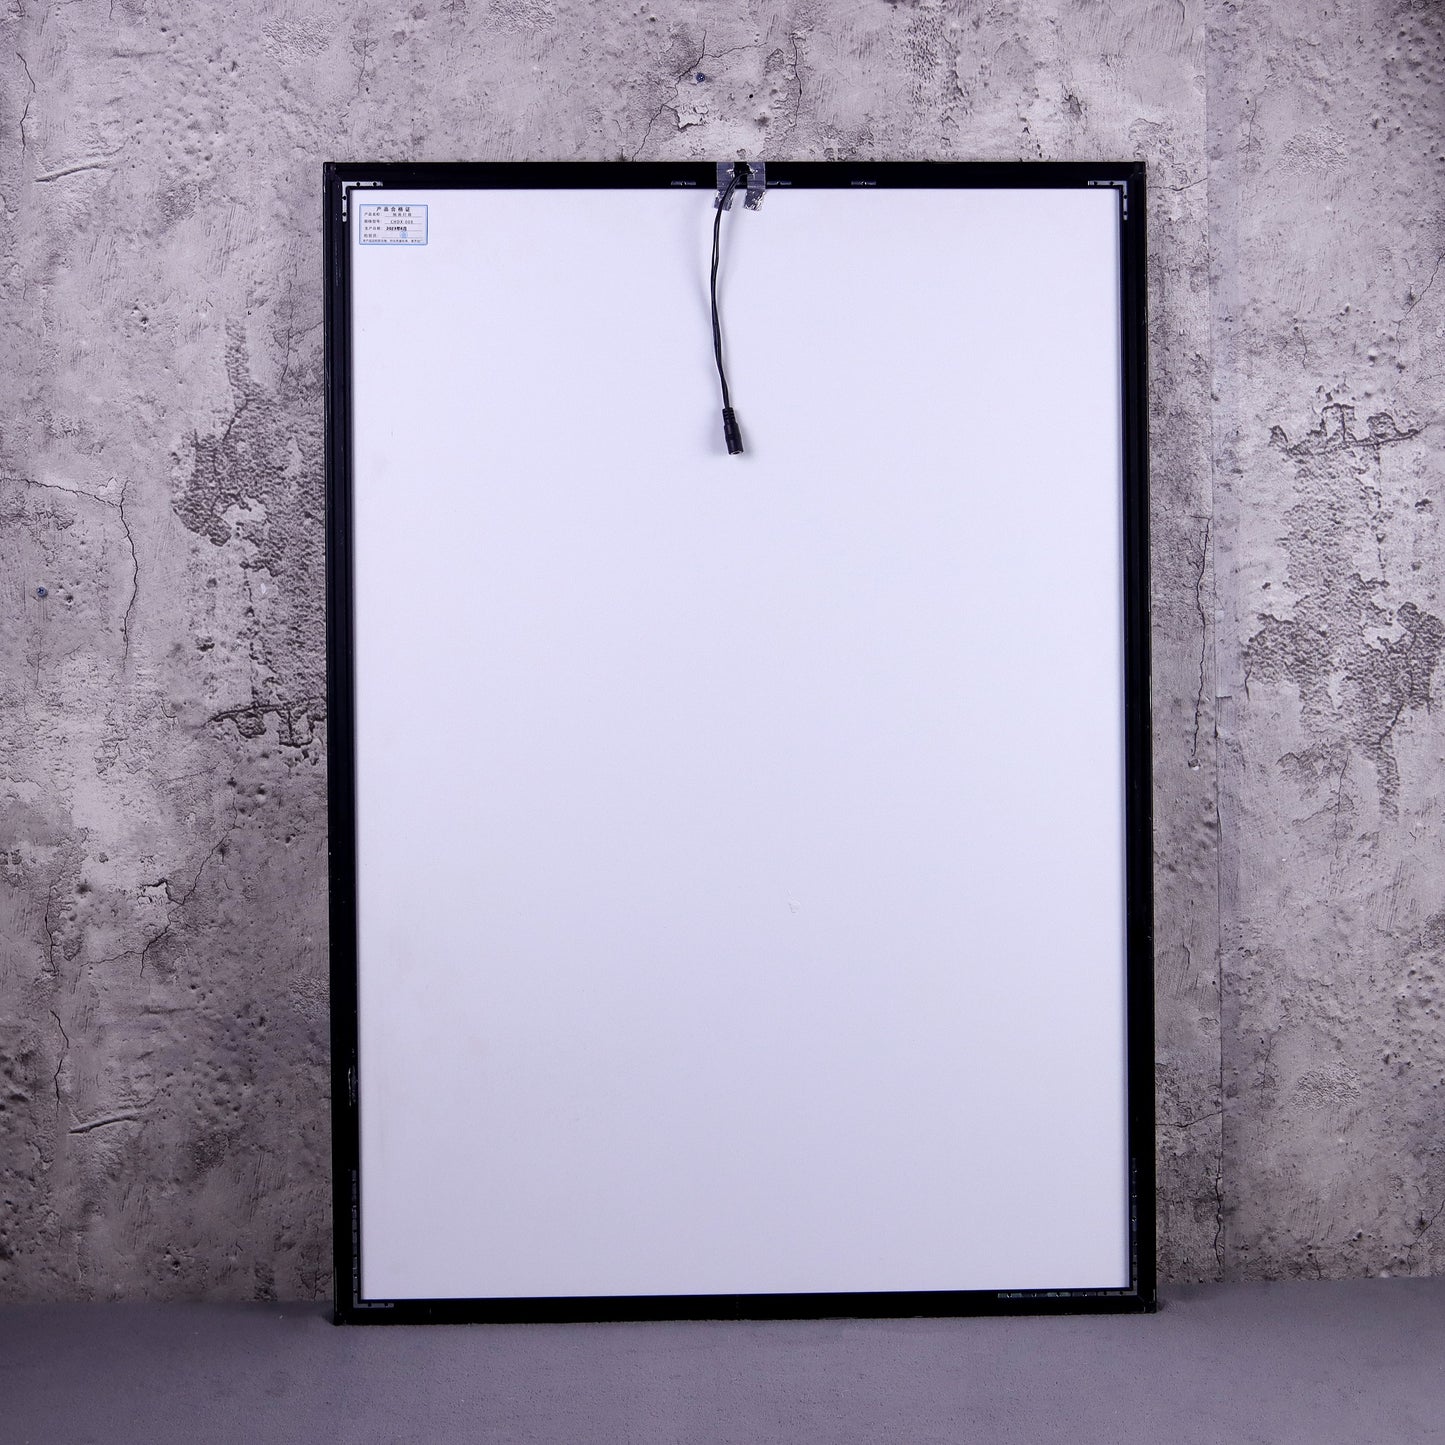 Indoor Use Only - Ultra-Thin LED Light Box Sign for Business Advertising Use